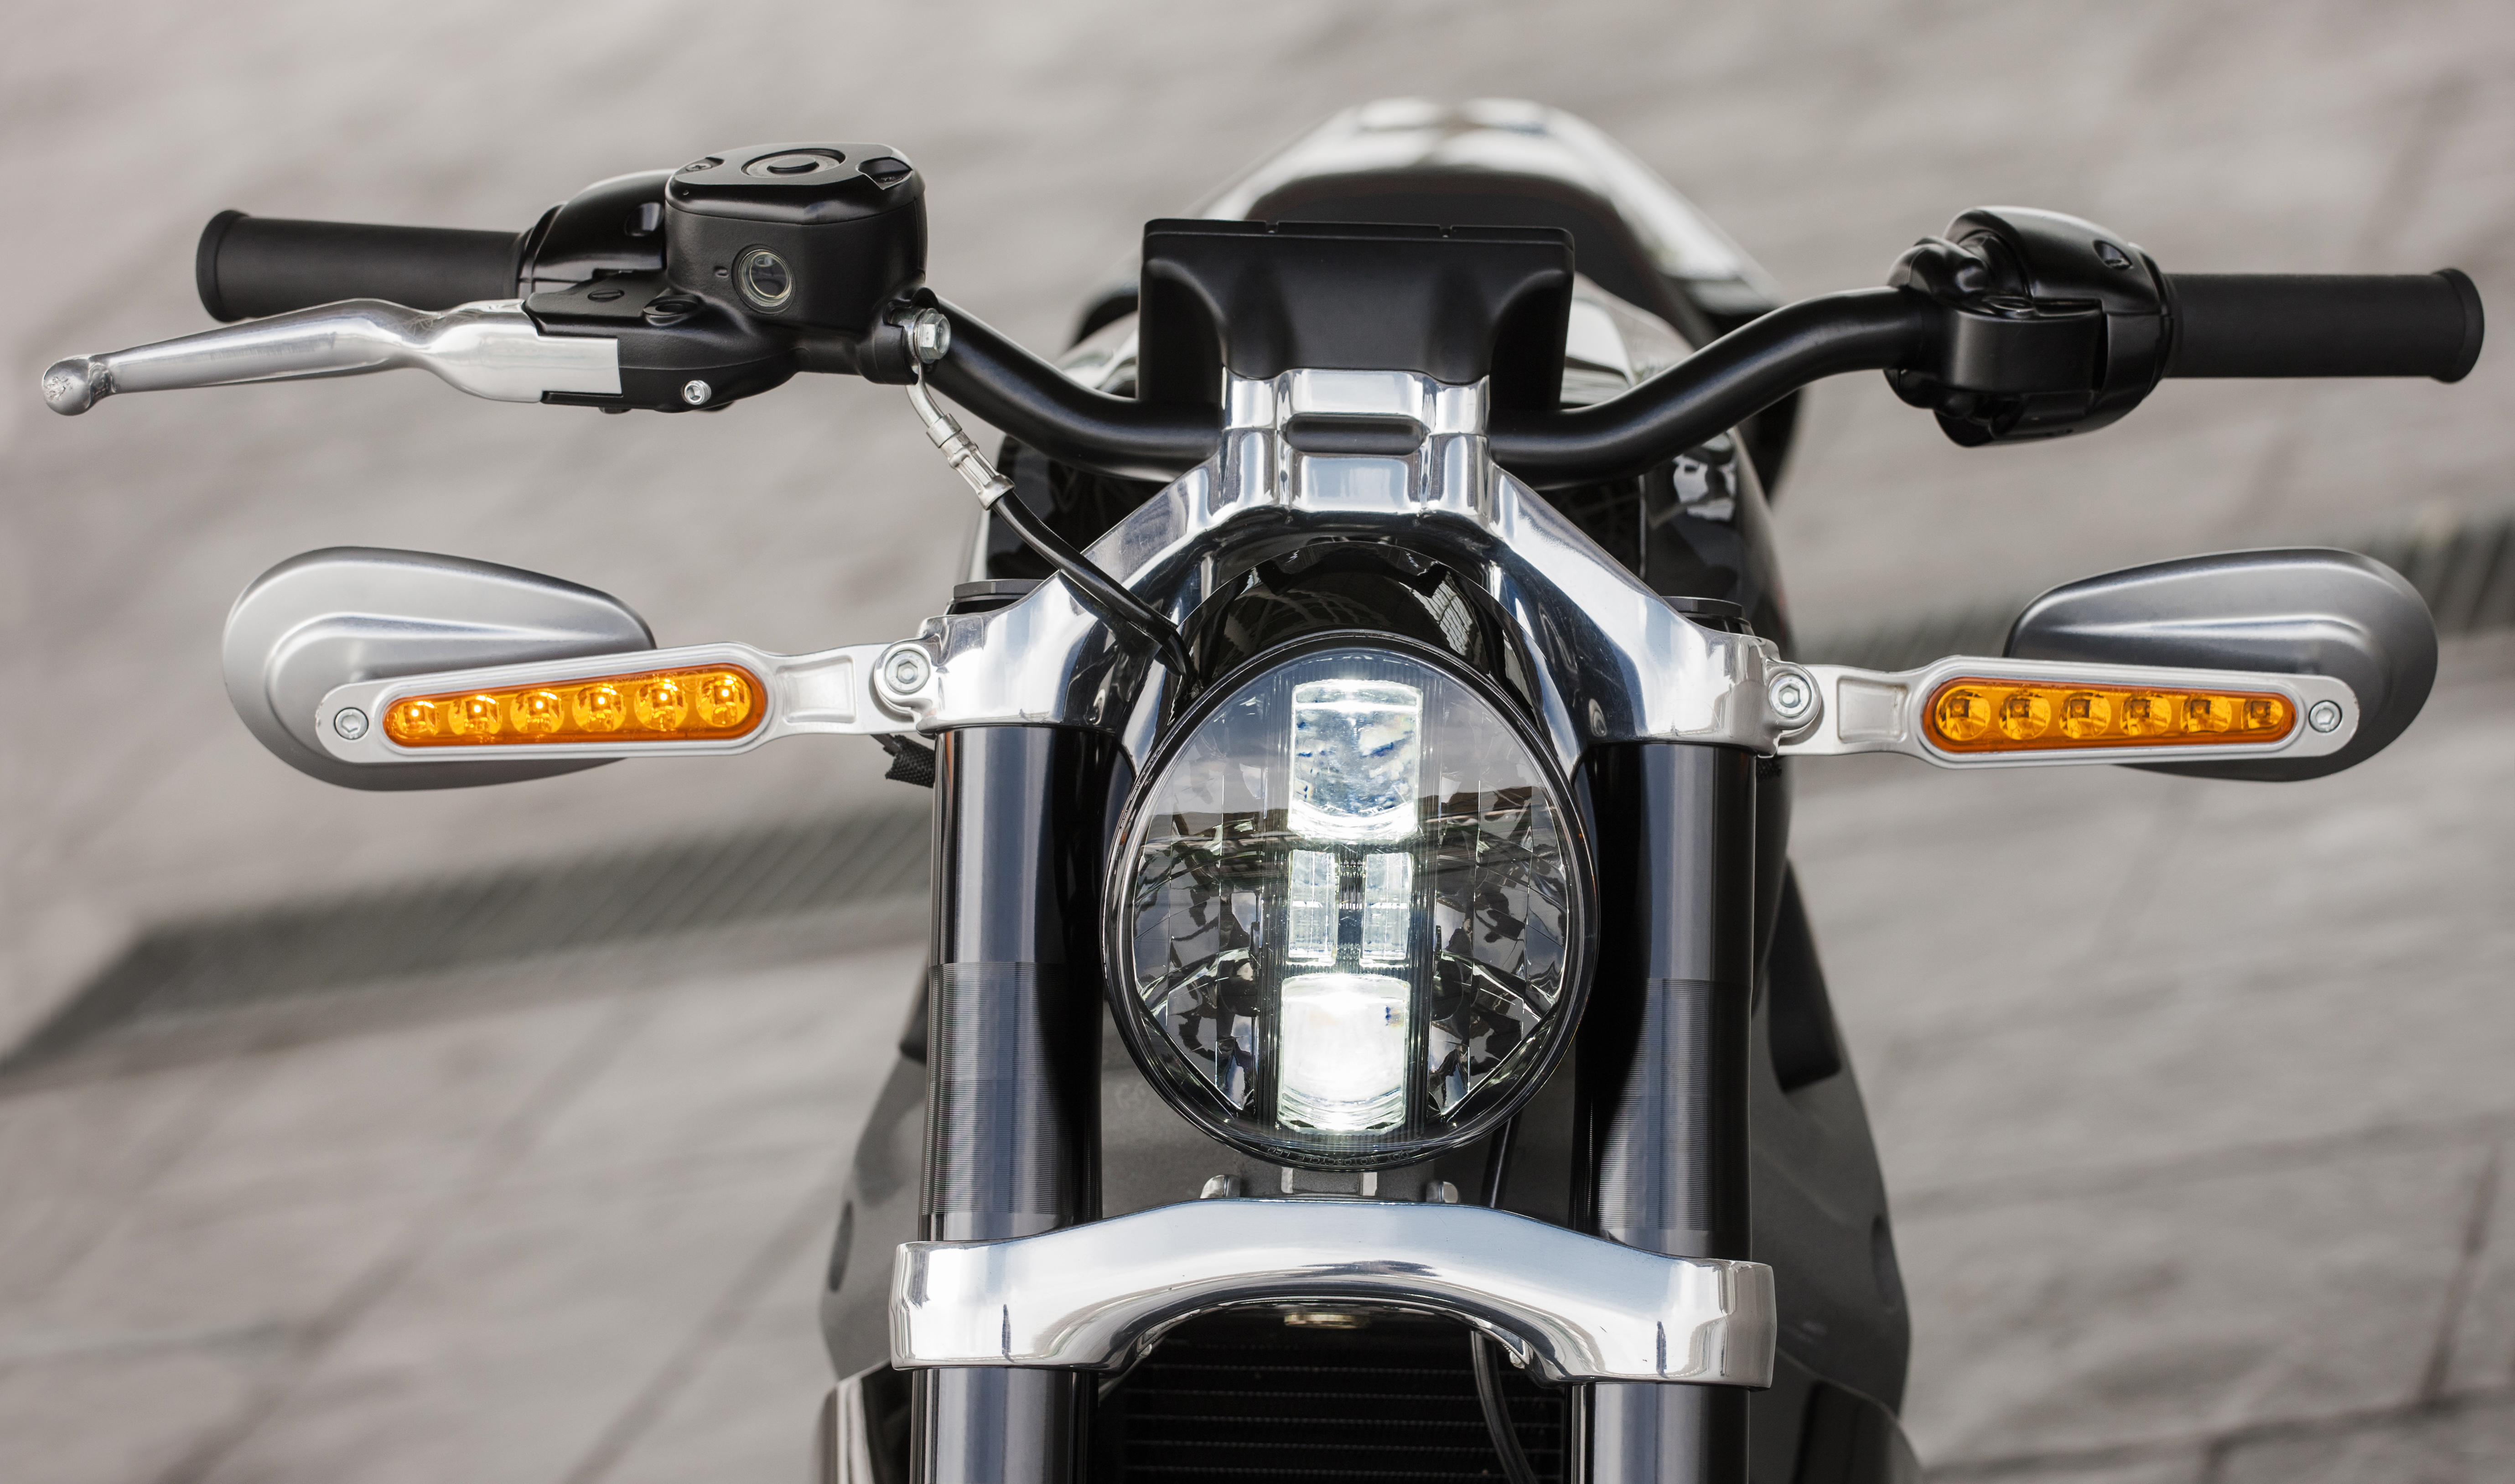 First ride: Harley-Davidson LiveWire review